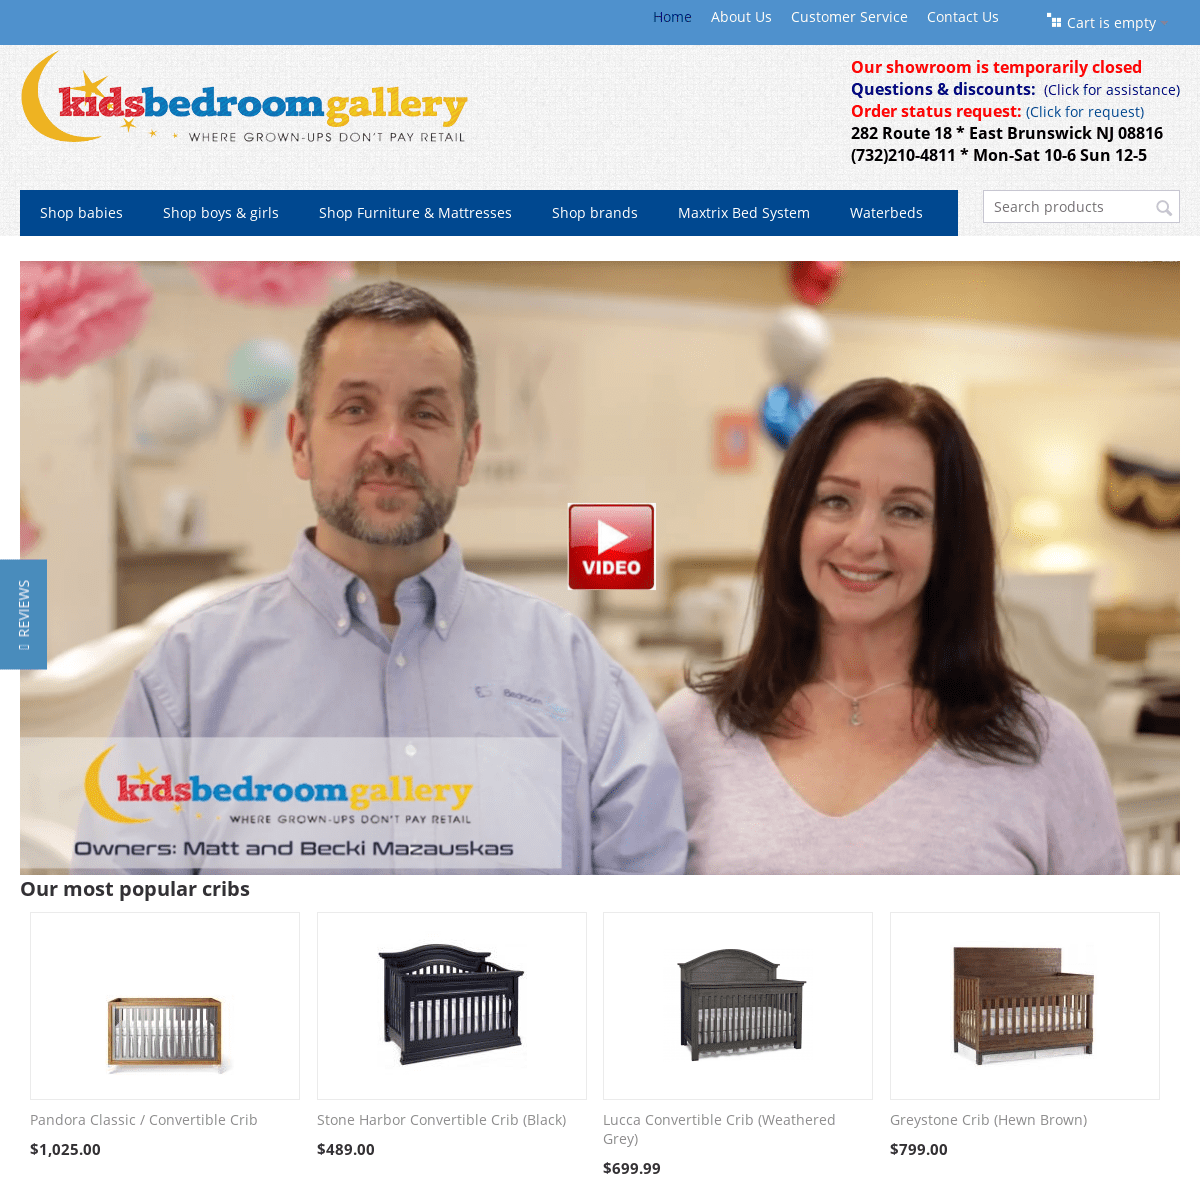 A complete backup of kidsbedroomgallery.com